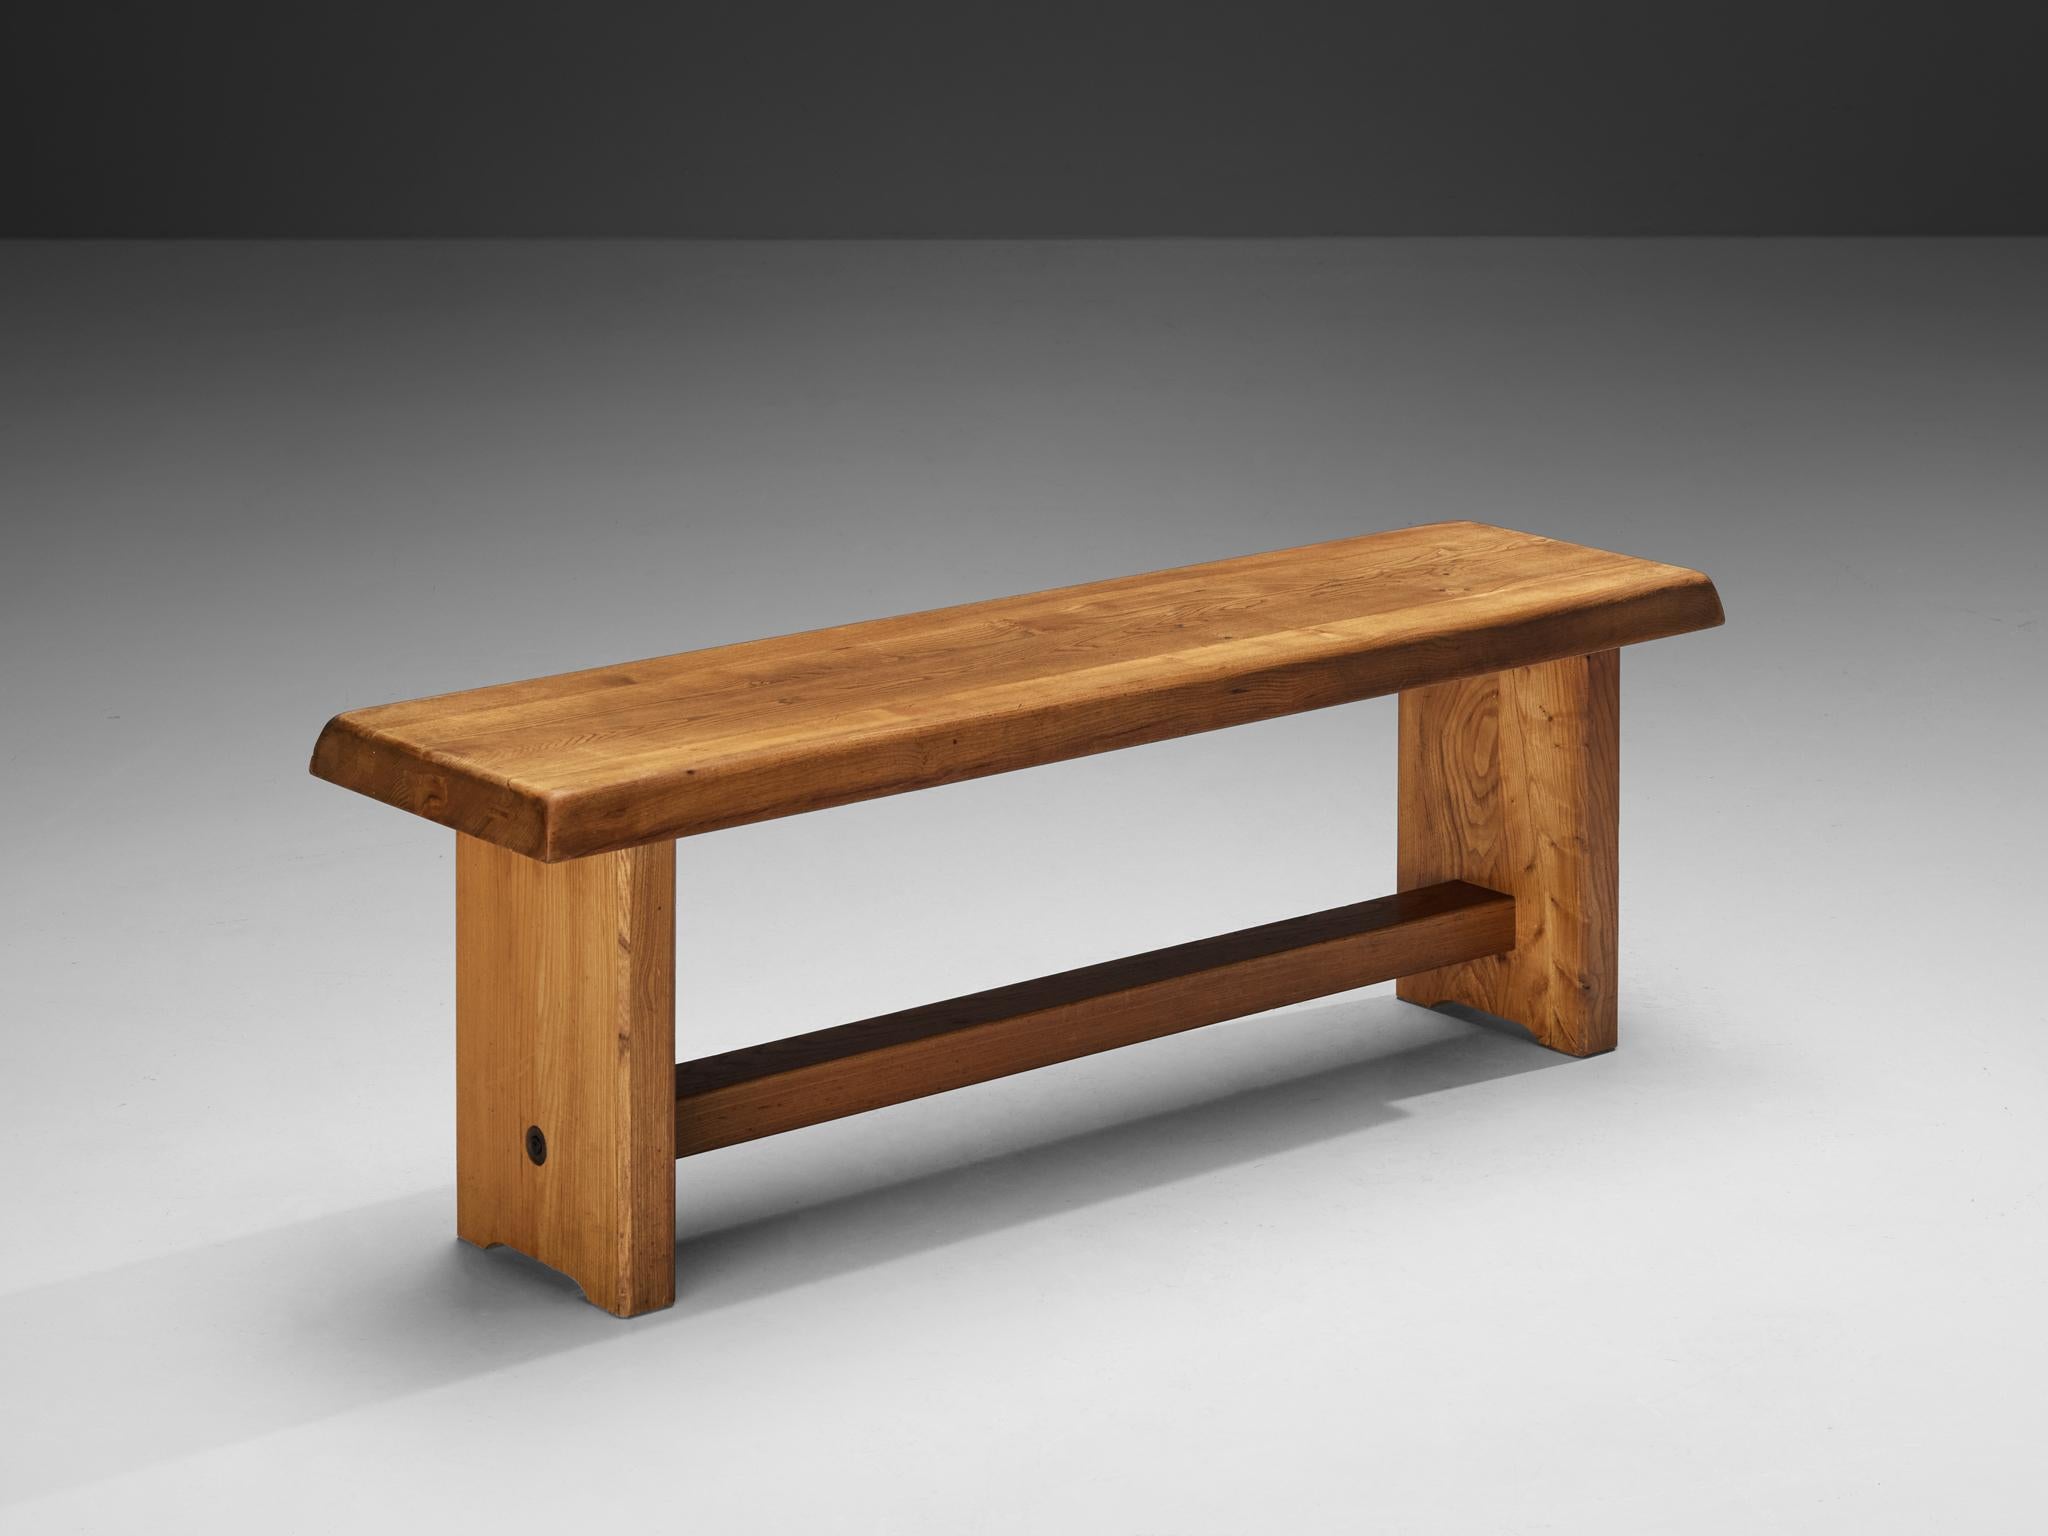 Pierre Chapo, bench, model 'S14A', solid elm, France, circa 1960

The elm bench is an exquisite creation designed by the renowned French designer, Pierre Chapo. Its rectangular top showcases gently sloping edges, gracefully supported by a